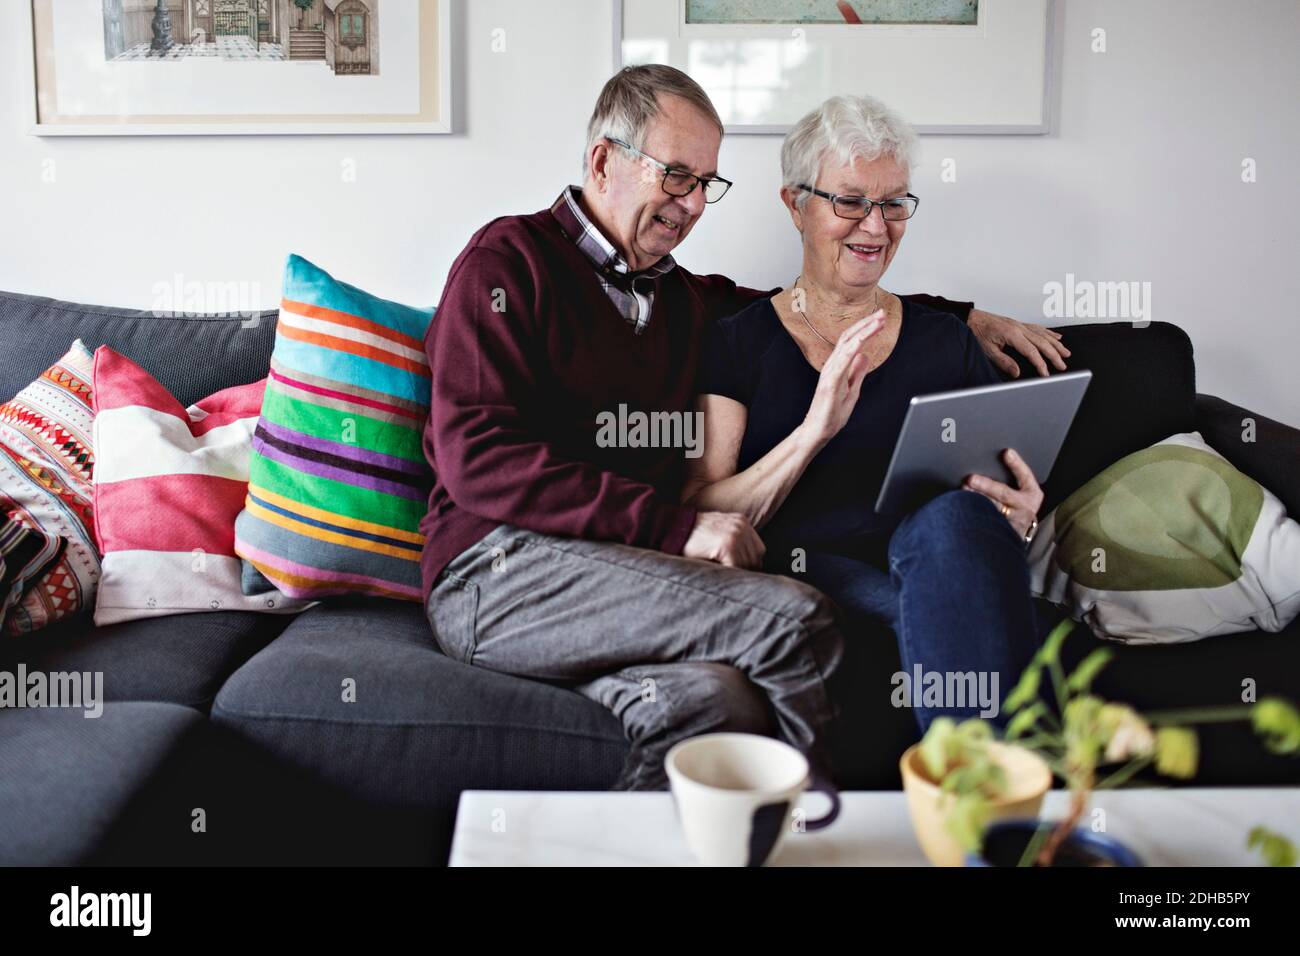 Smiling senior couple sitting on sofa sharing digital tablet in living room at home Stock Photo